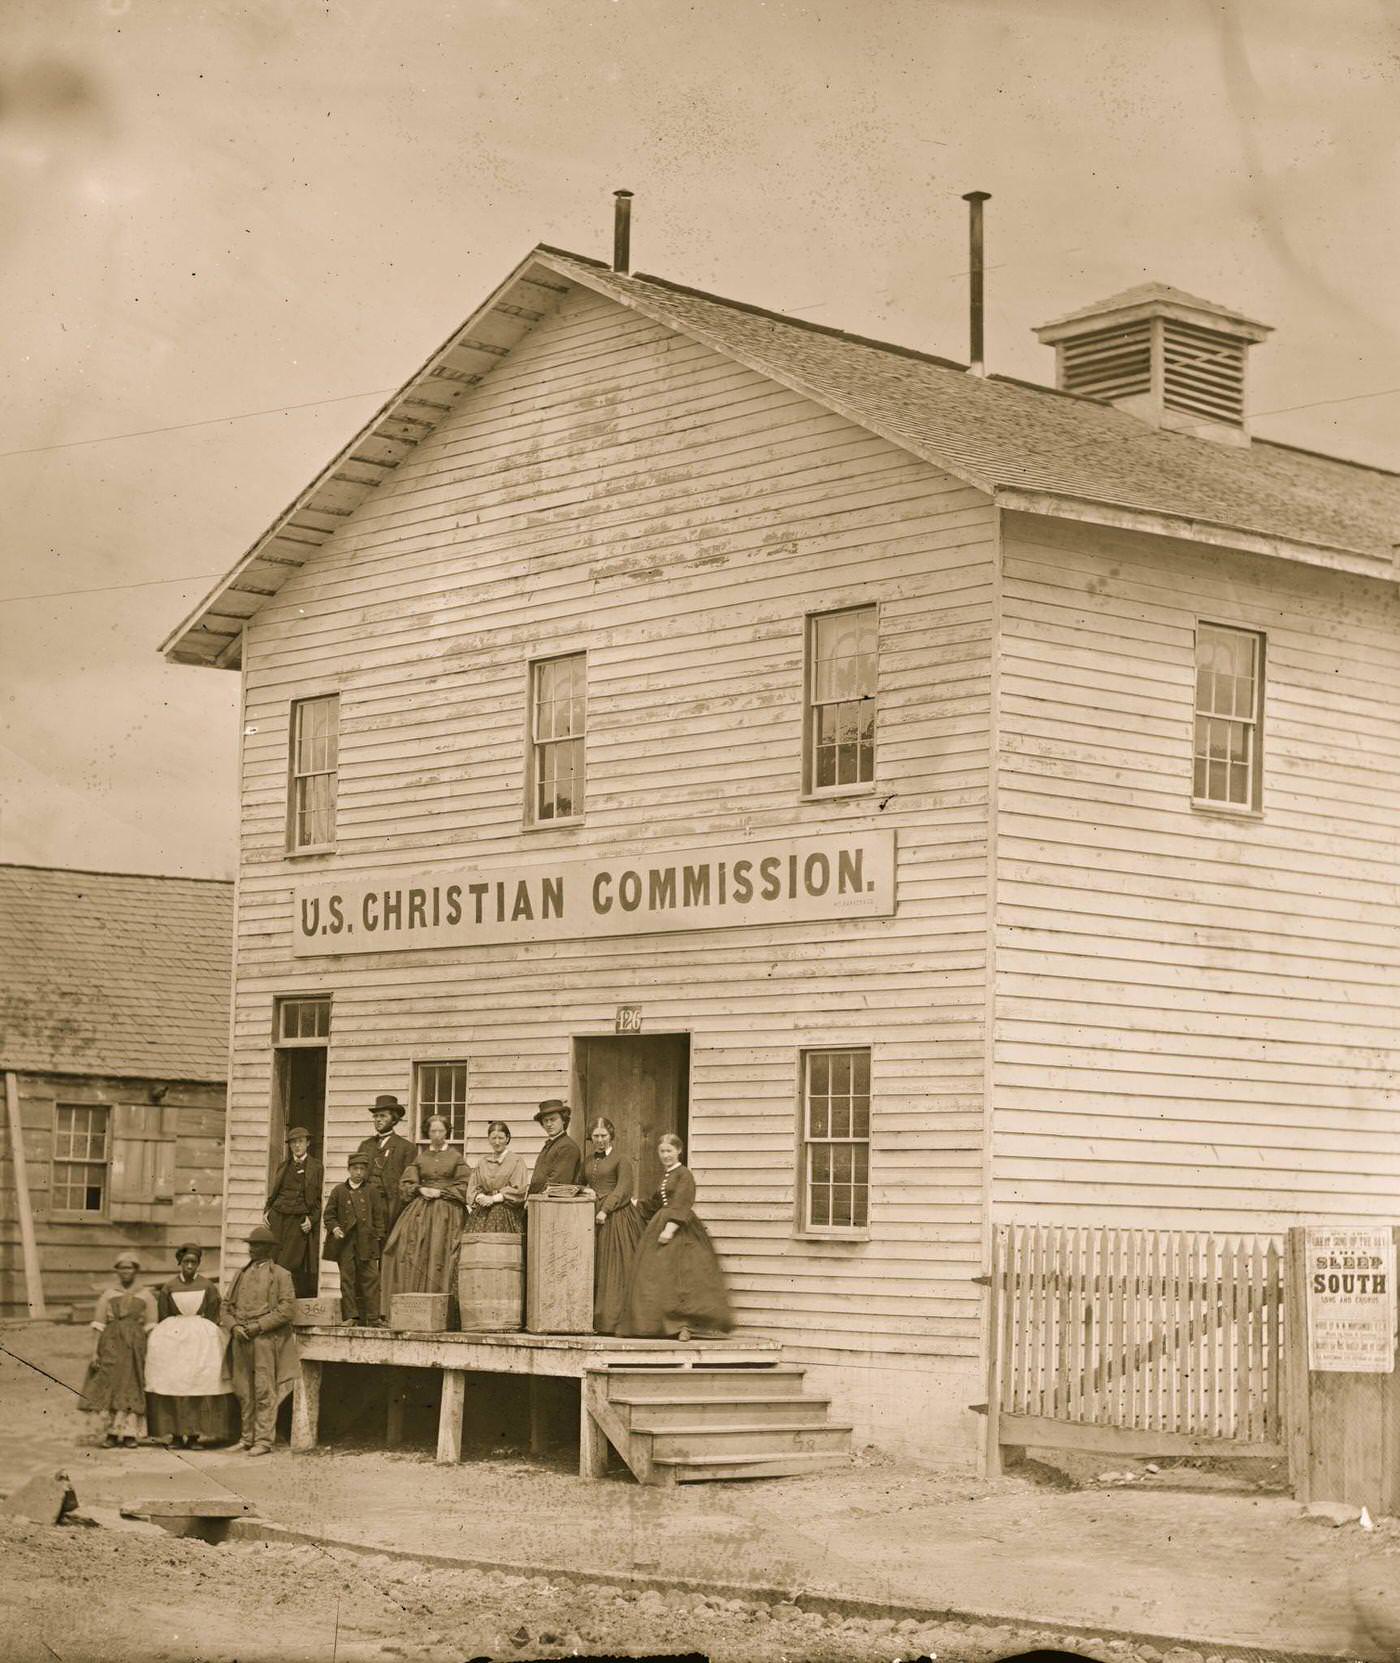 Office of U.S. Christian Commission Protestant Organization founded by the YMCA to provide religious and social services to Union Troops; Founded in 1861 in New York after the First Battle of Bull Run.